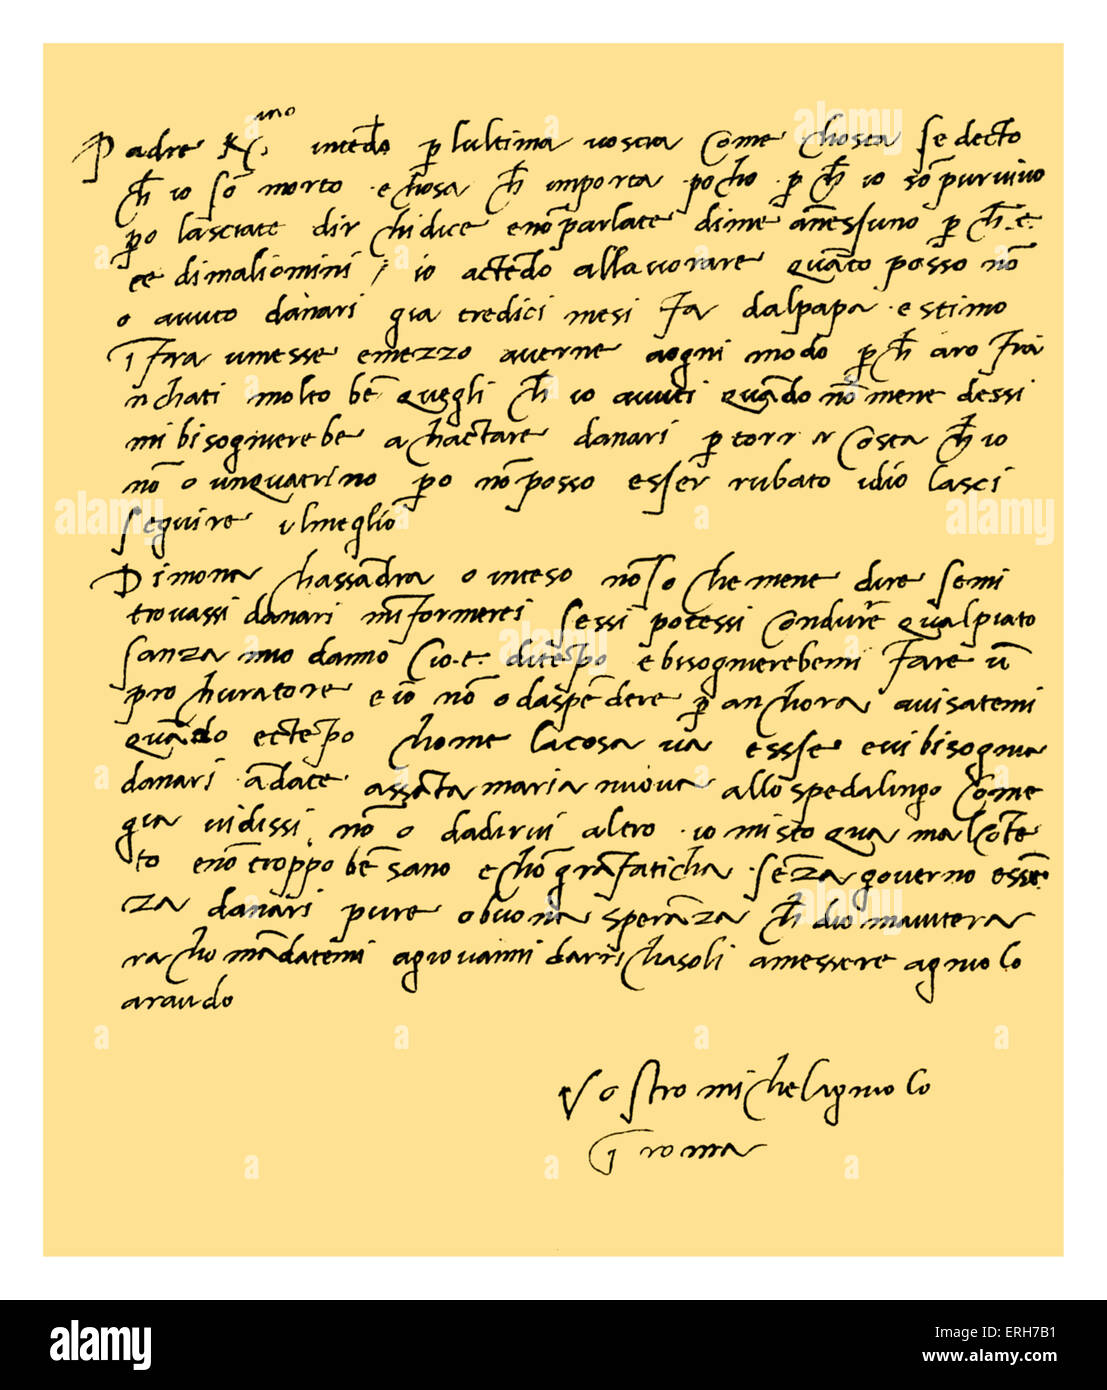 Autograph: Letter in Italian from Michelangelo Buonarroti to his father, Lodovico di Buonarrota Simoni in Florence. Michelangelo Buonarroti contradicts a rumour of his death and complains that he has received no money from the Pope for thirteen months. Further, he refers to a suit for dower for his aunt Monna Cassandra (widow of Francesco Buonarroti). June 1508. Signature: Michelagniolo Buonarroti. Renaissance painter, sculptor, architect, poet and engineer. 6 March 1475 – 18 February 1564. Source: British Museum. Stock Photo